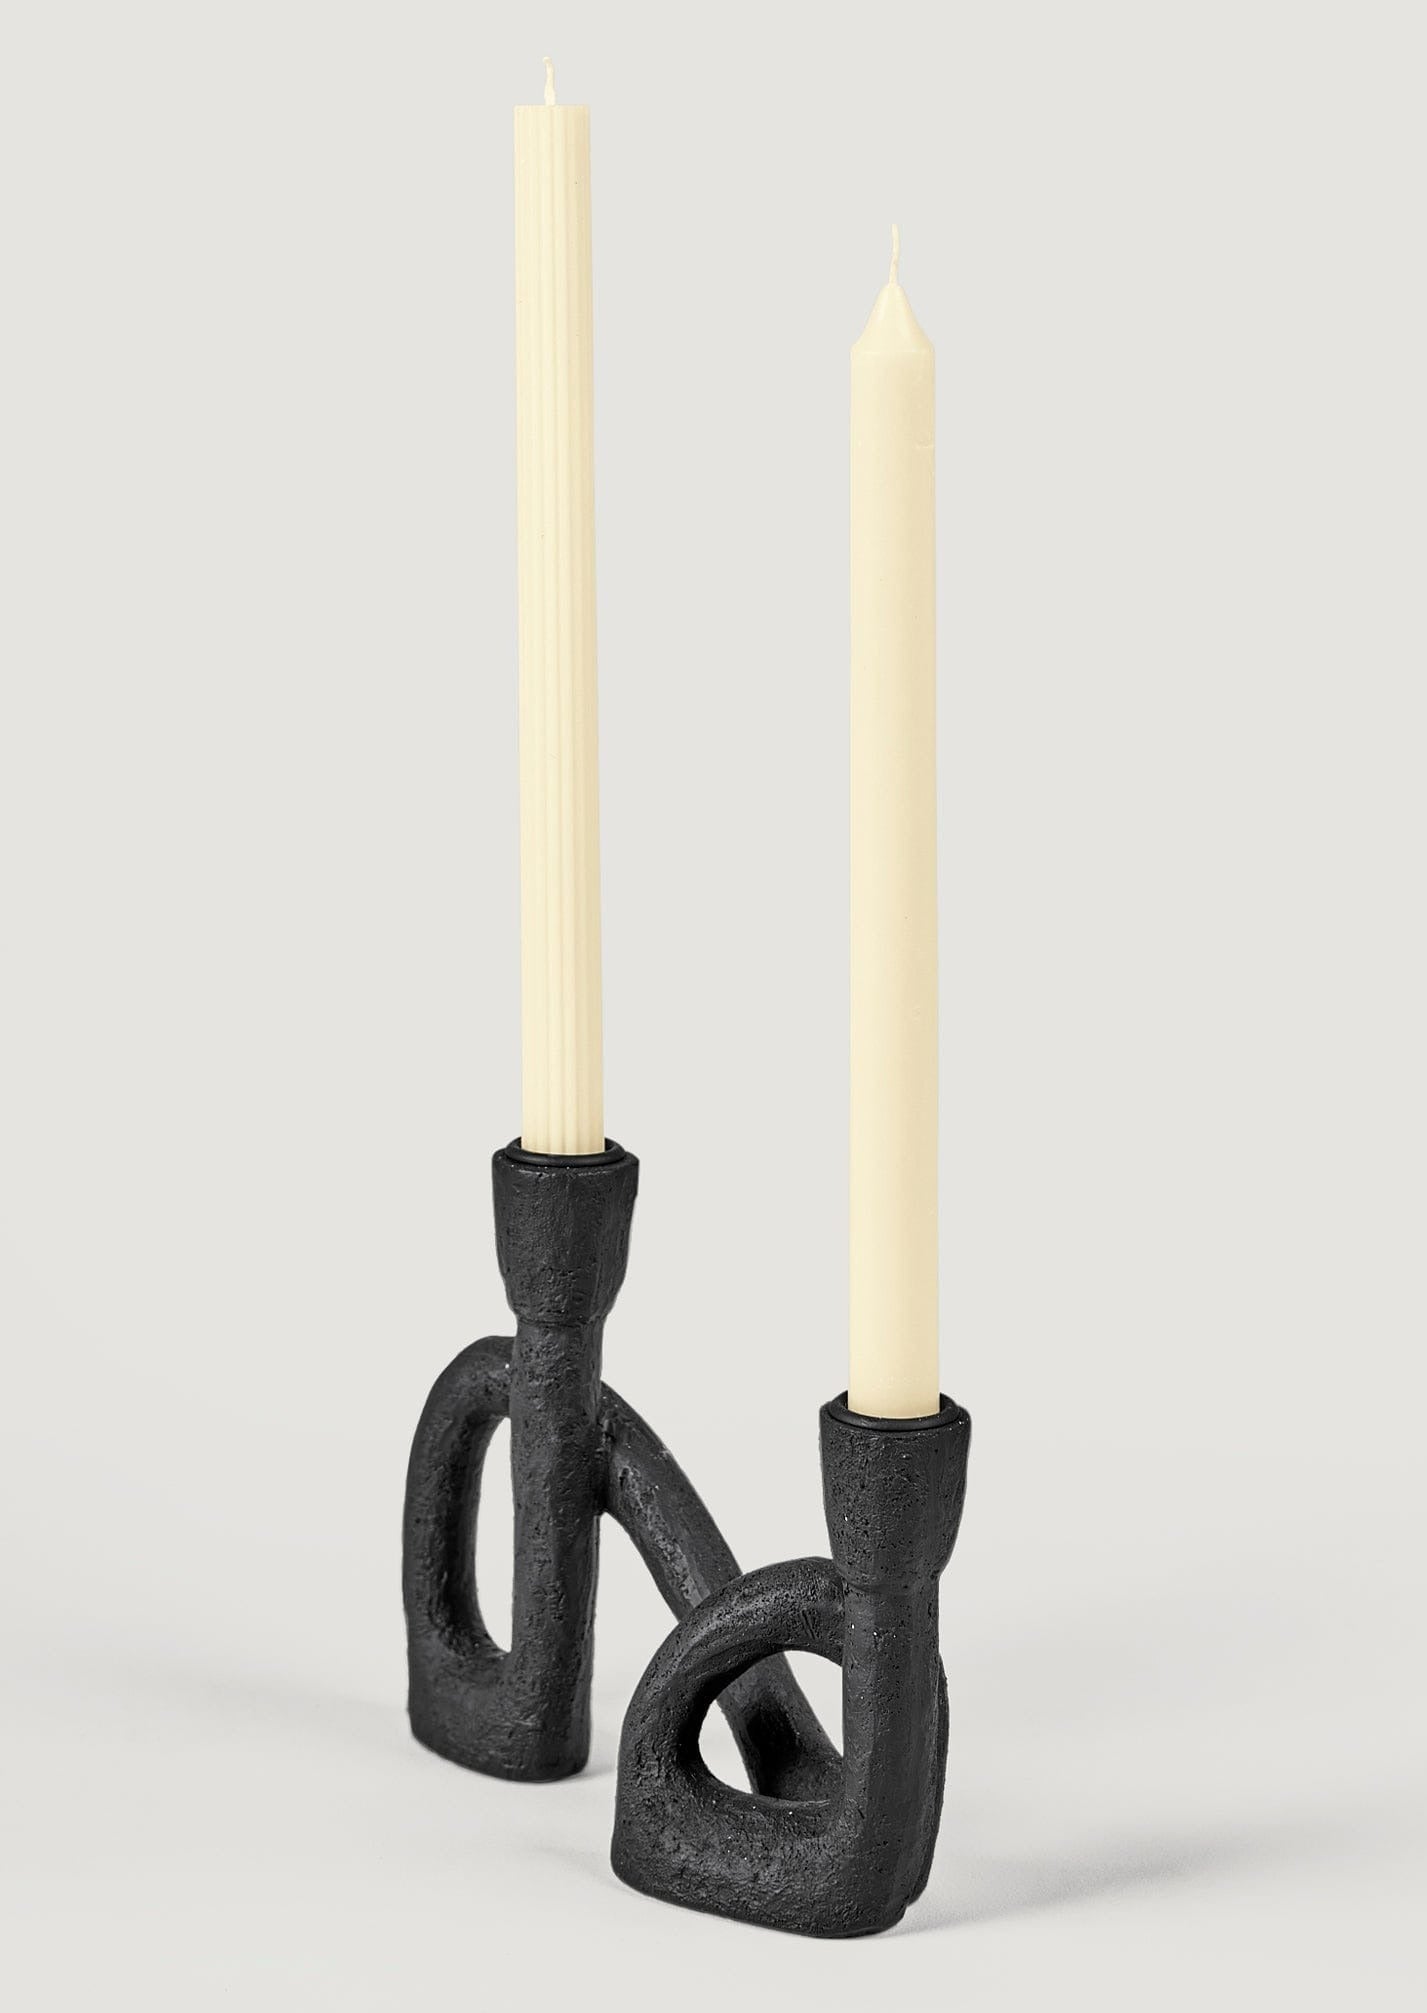 https://www.afloral.com/cdn/shop/files/Black-Double-Taper-Candle-Holder-Styled-with-Cream-Candles_01cef510-4cd2-482d-8ce5-f03f219170e7.jpg?v=1700071298&width=1500